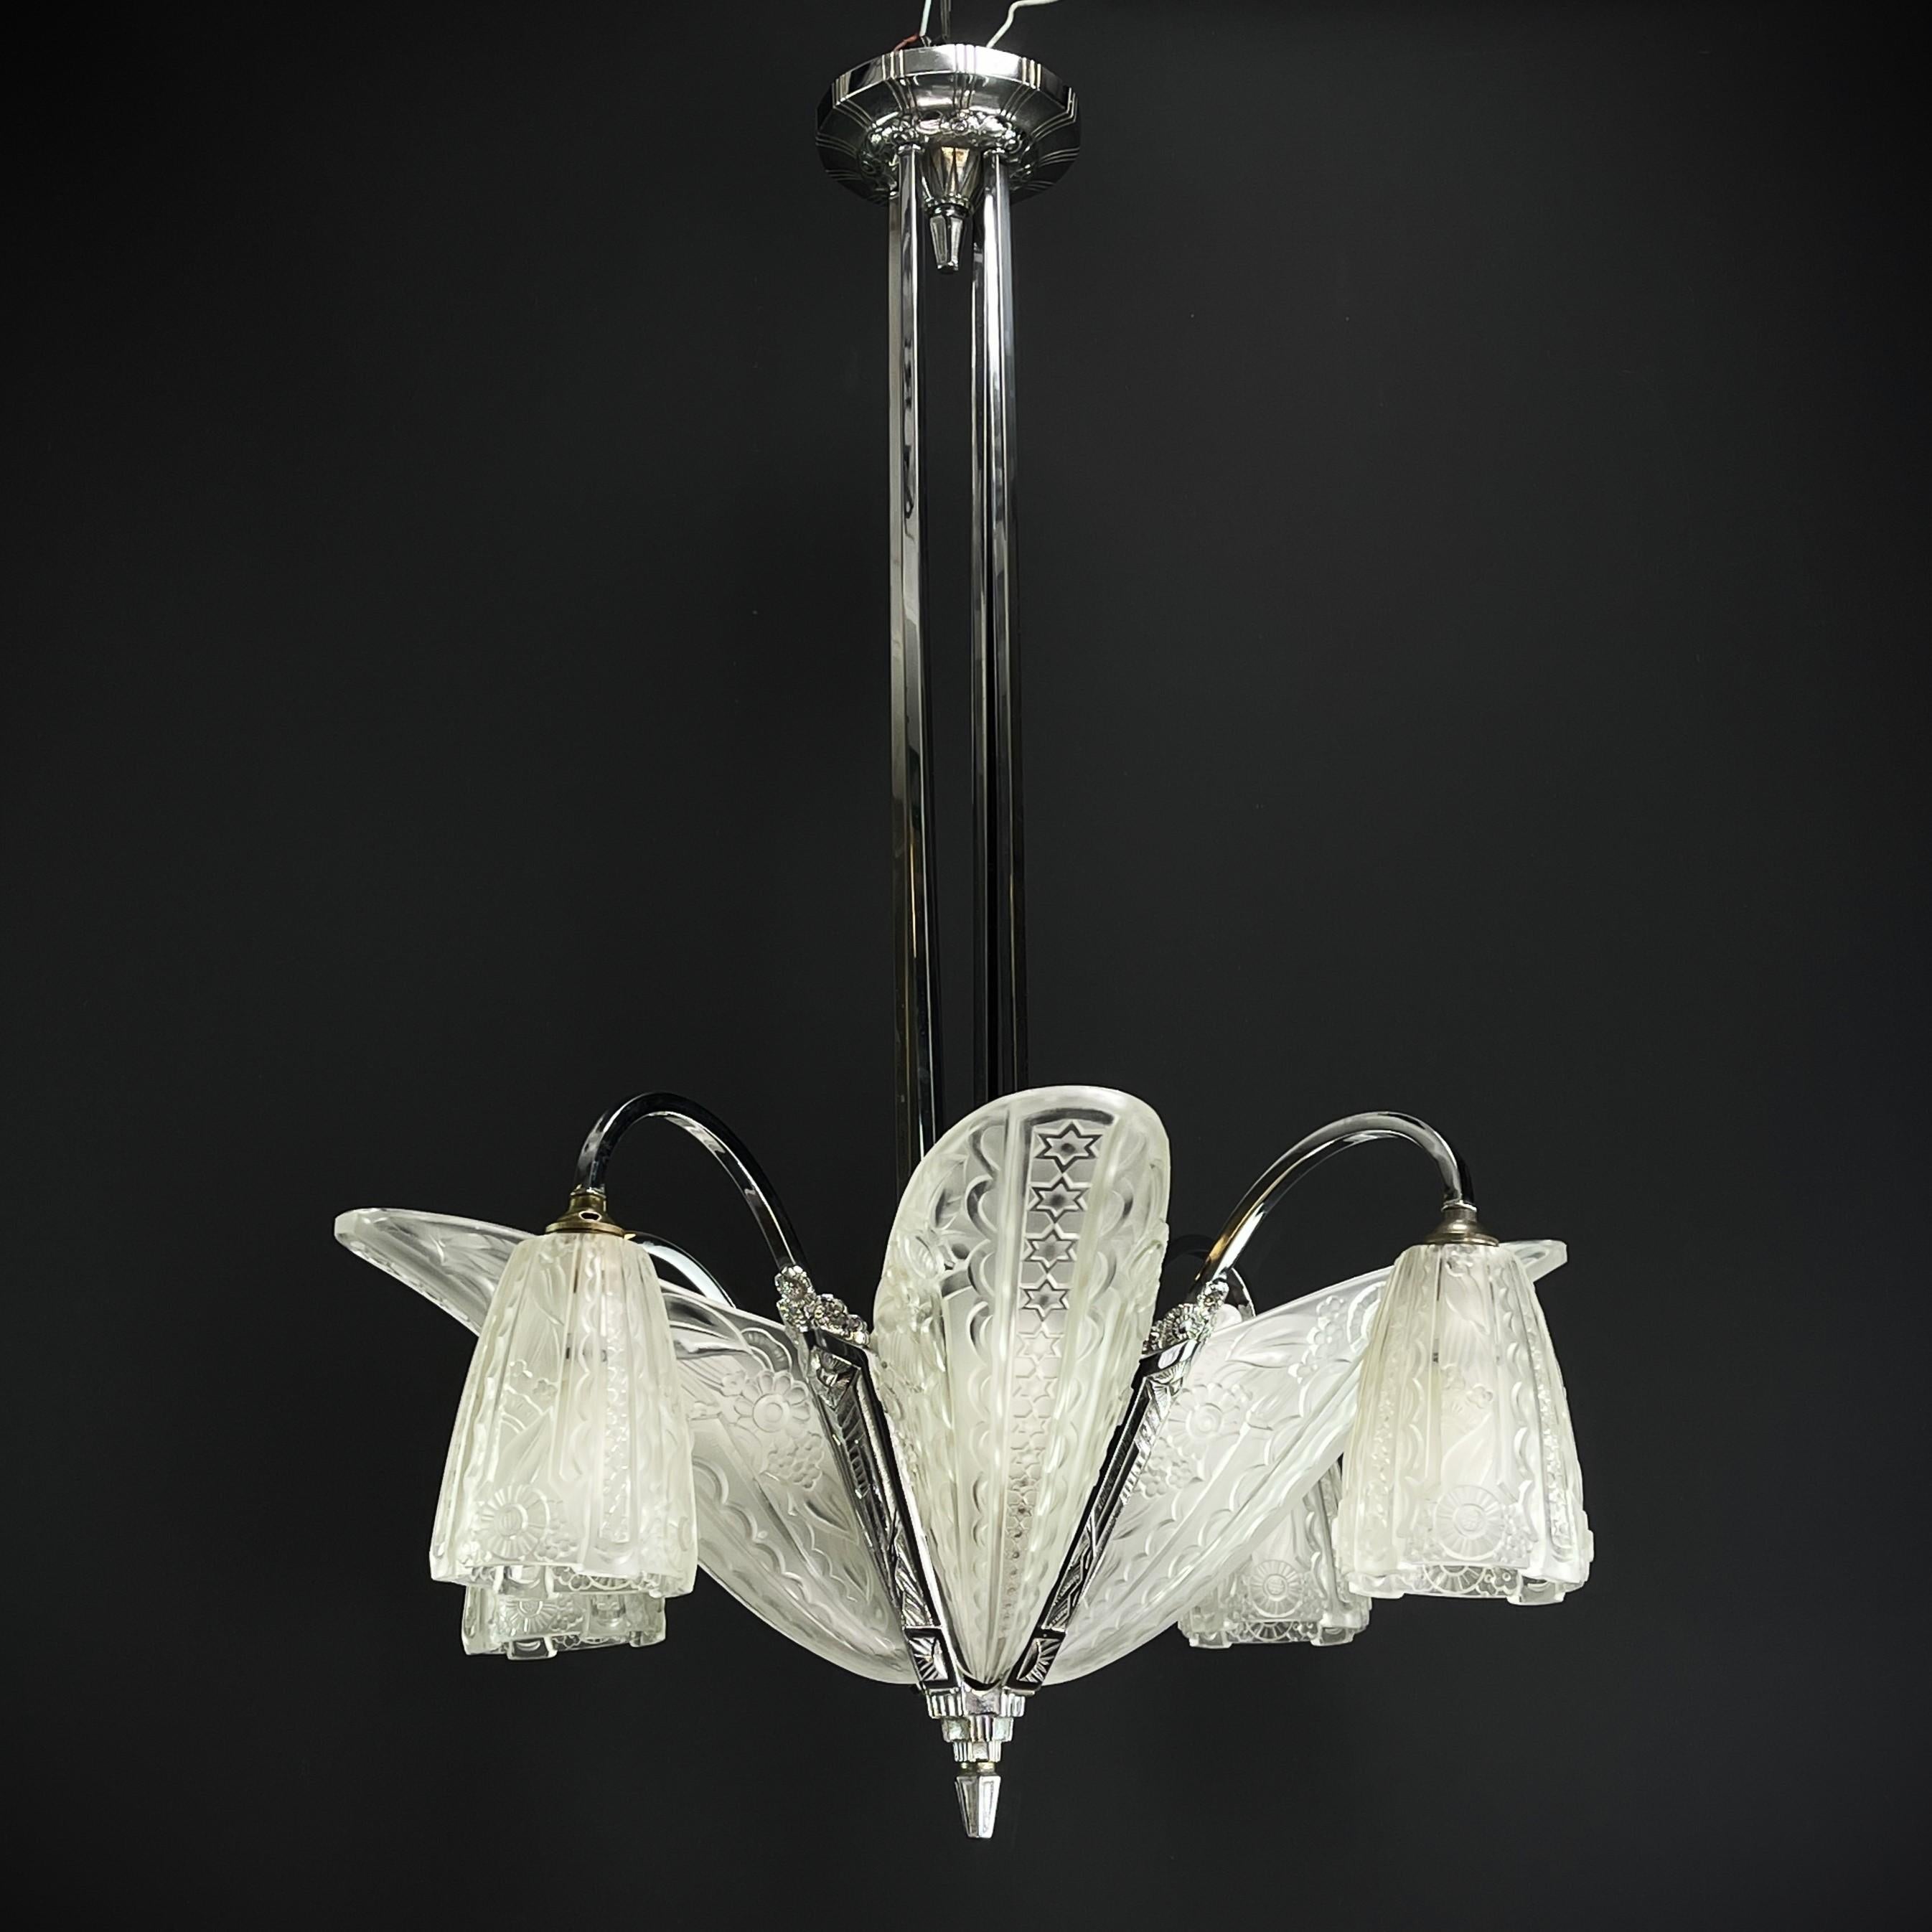 Art Deco Chandelier by Donna Paris

The ART DECO ceiling lamp is a remarkable example of the craftsmanship and style of the early 20th century. 

The signature 